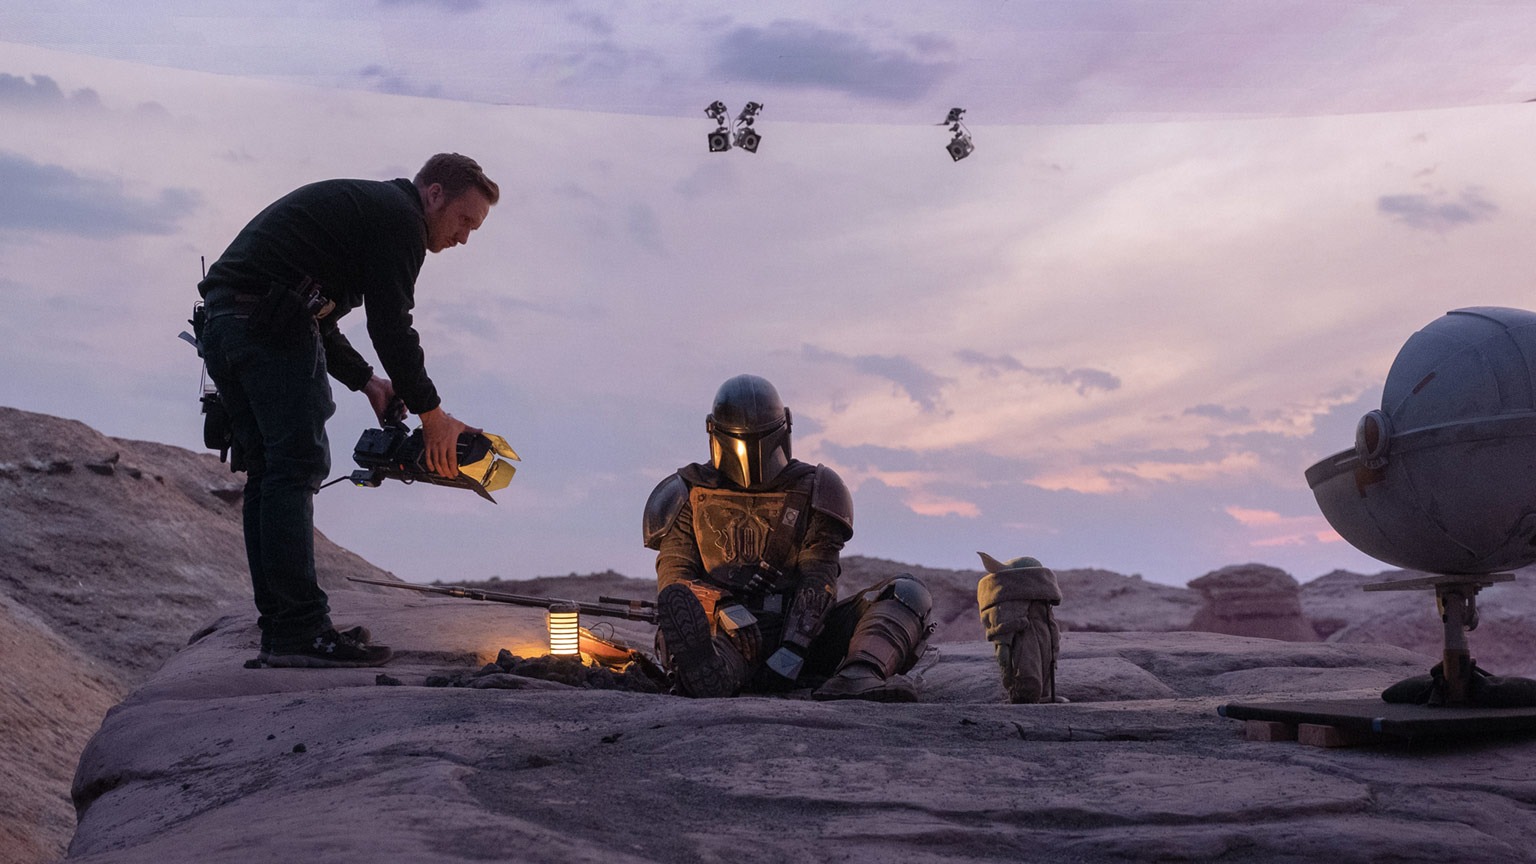 A behind the scenes photo of Grogu and Din Djarin filming The Mandalorian in The Volume set